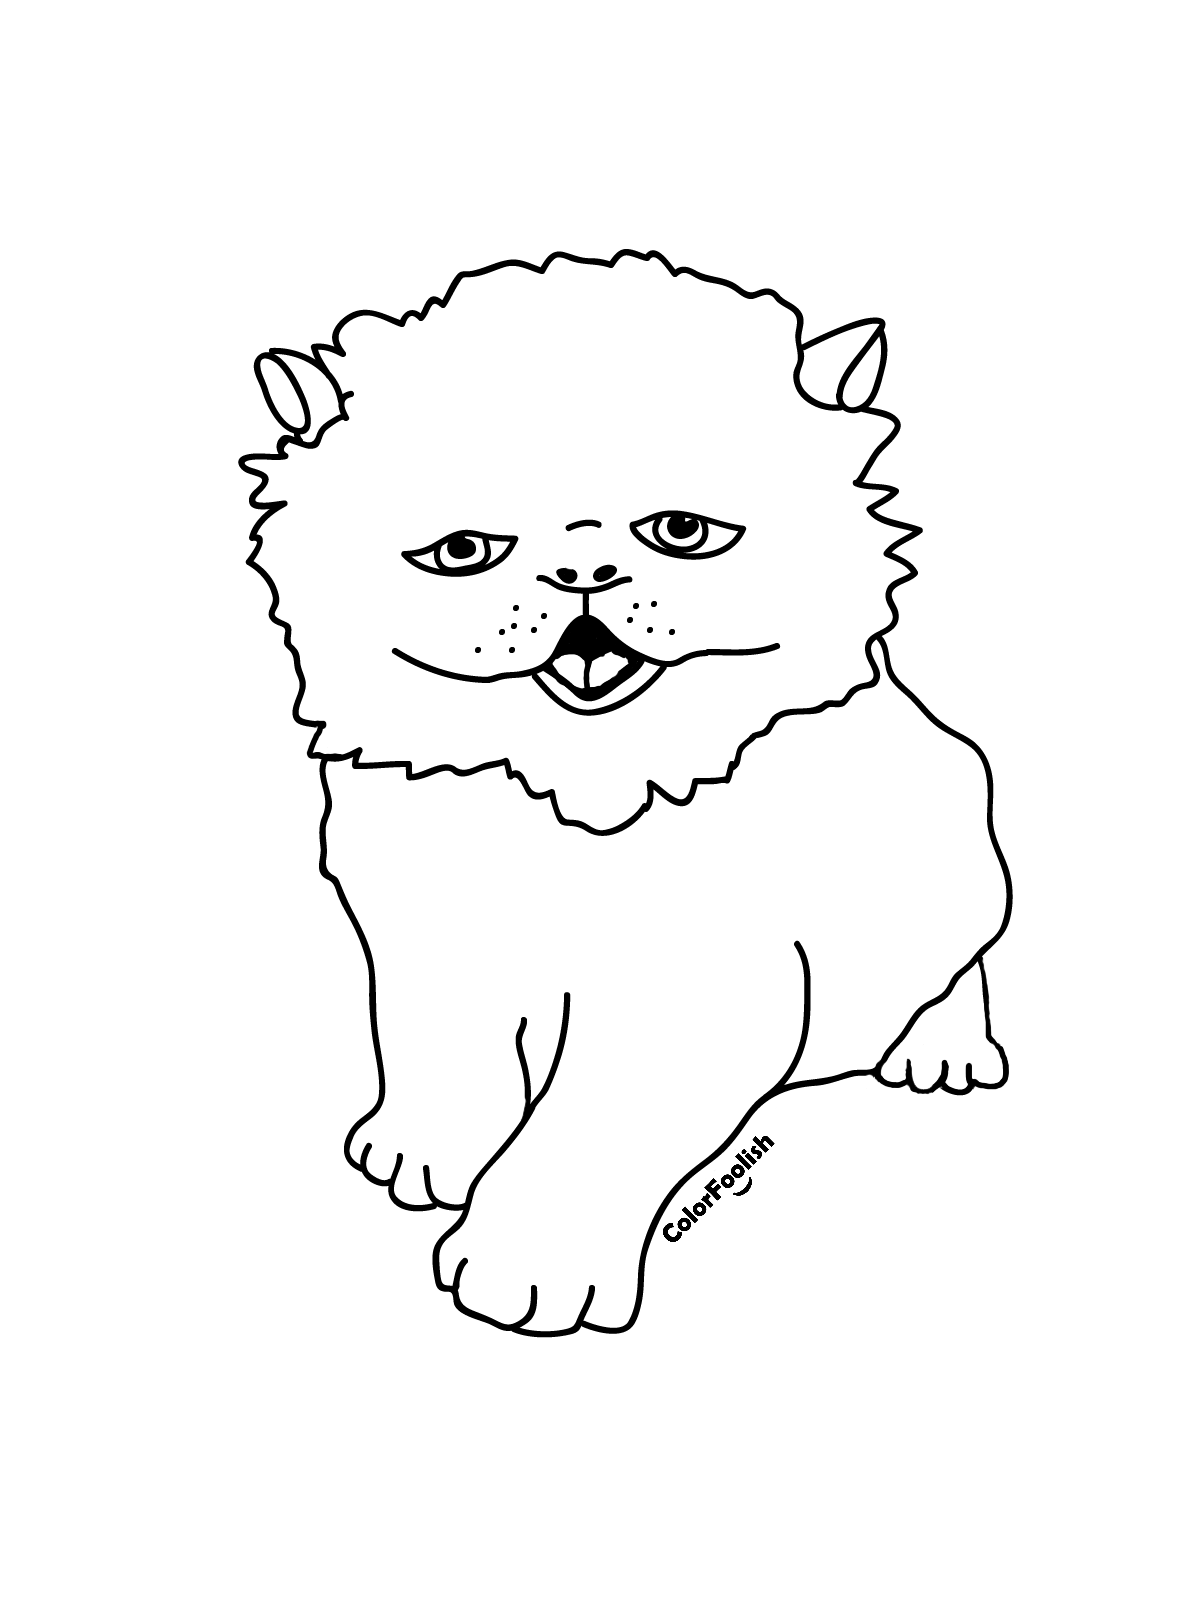 Coloring page of a Persian cat kitten